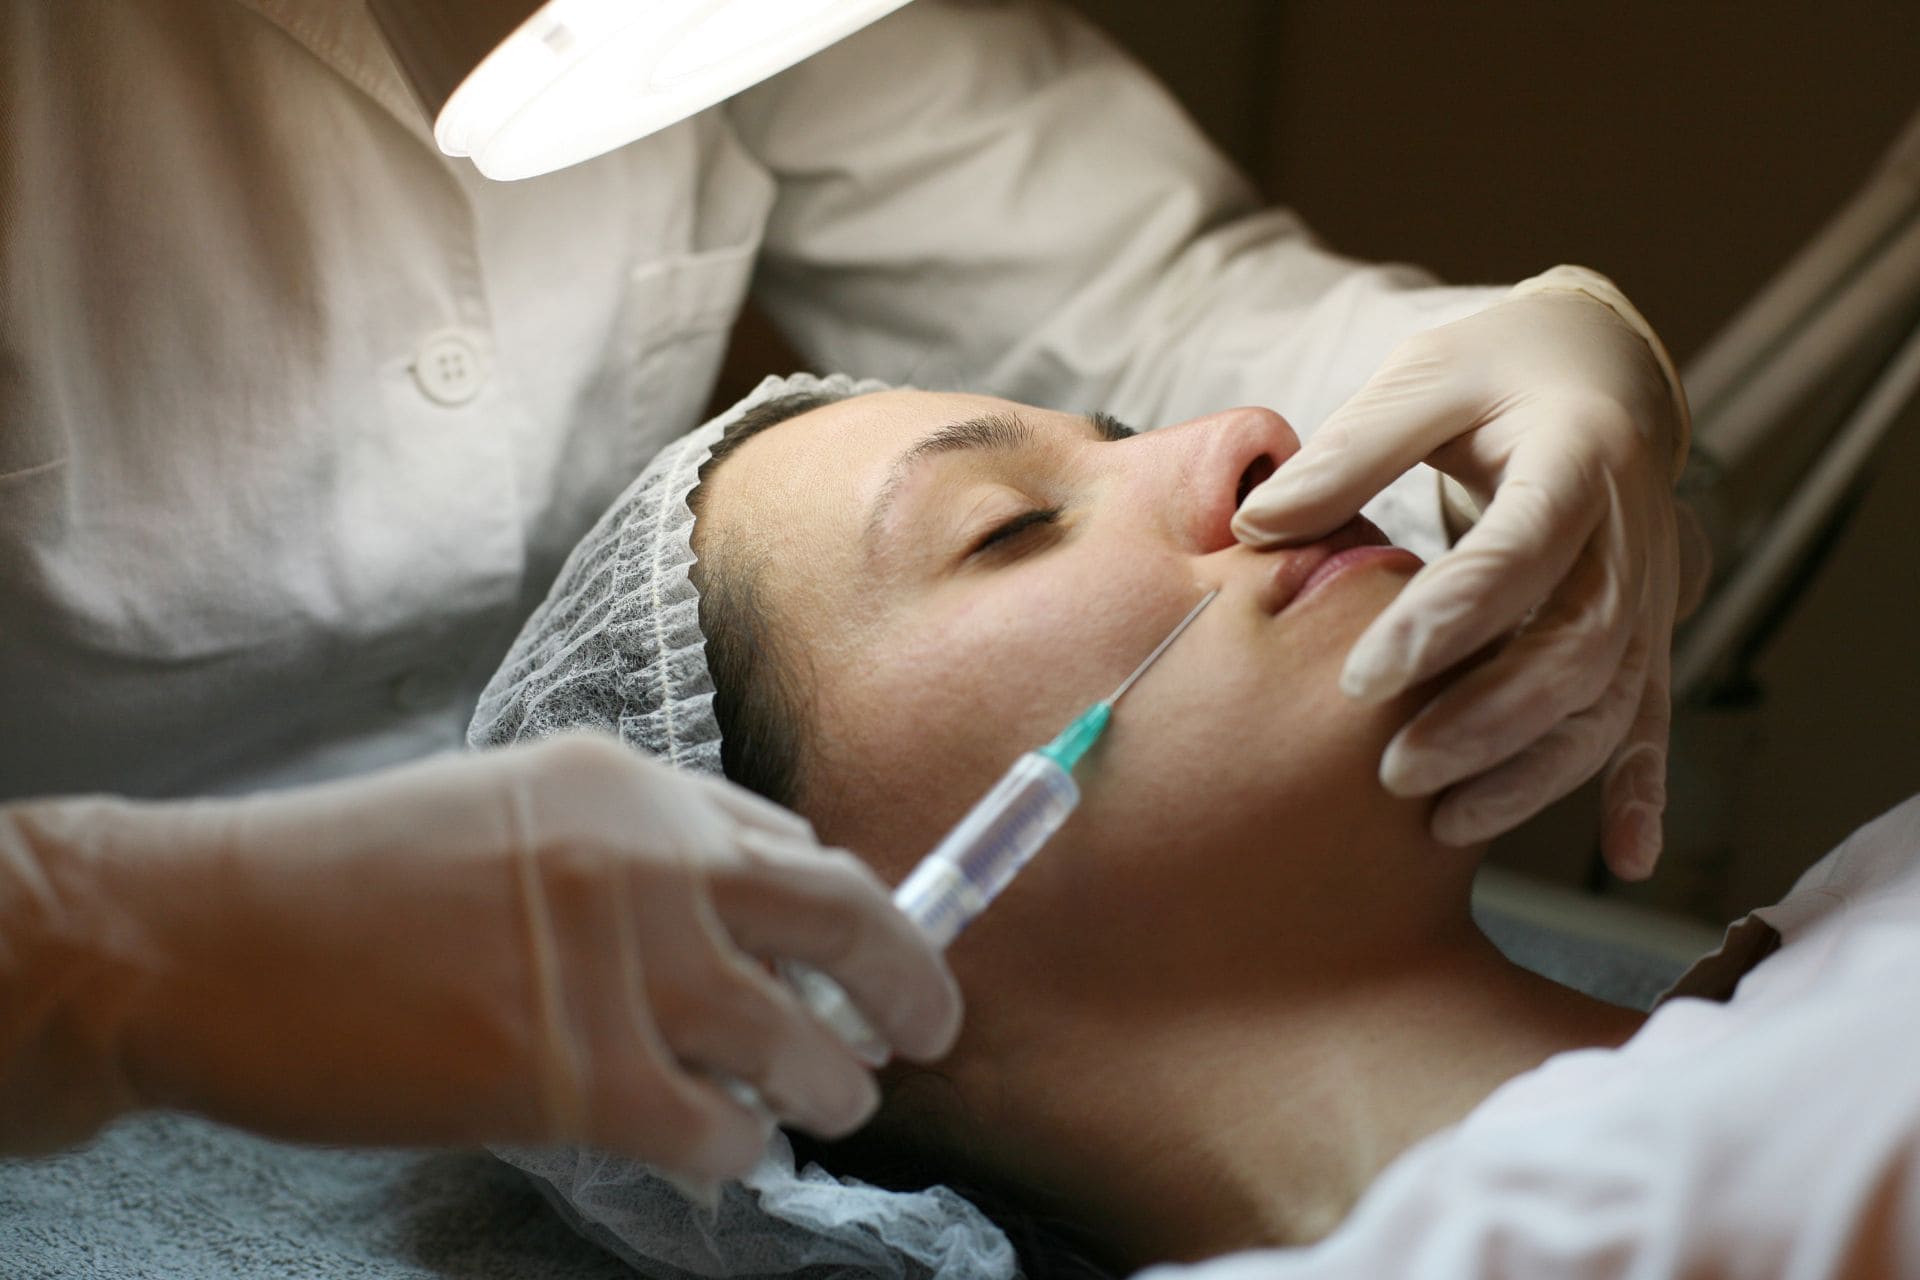 What You Need To Know About Botox